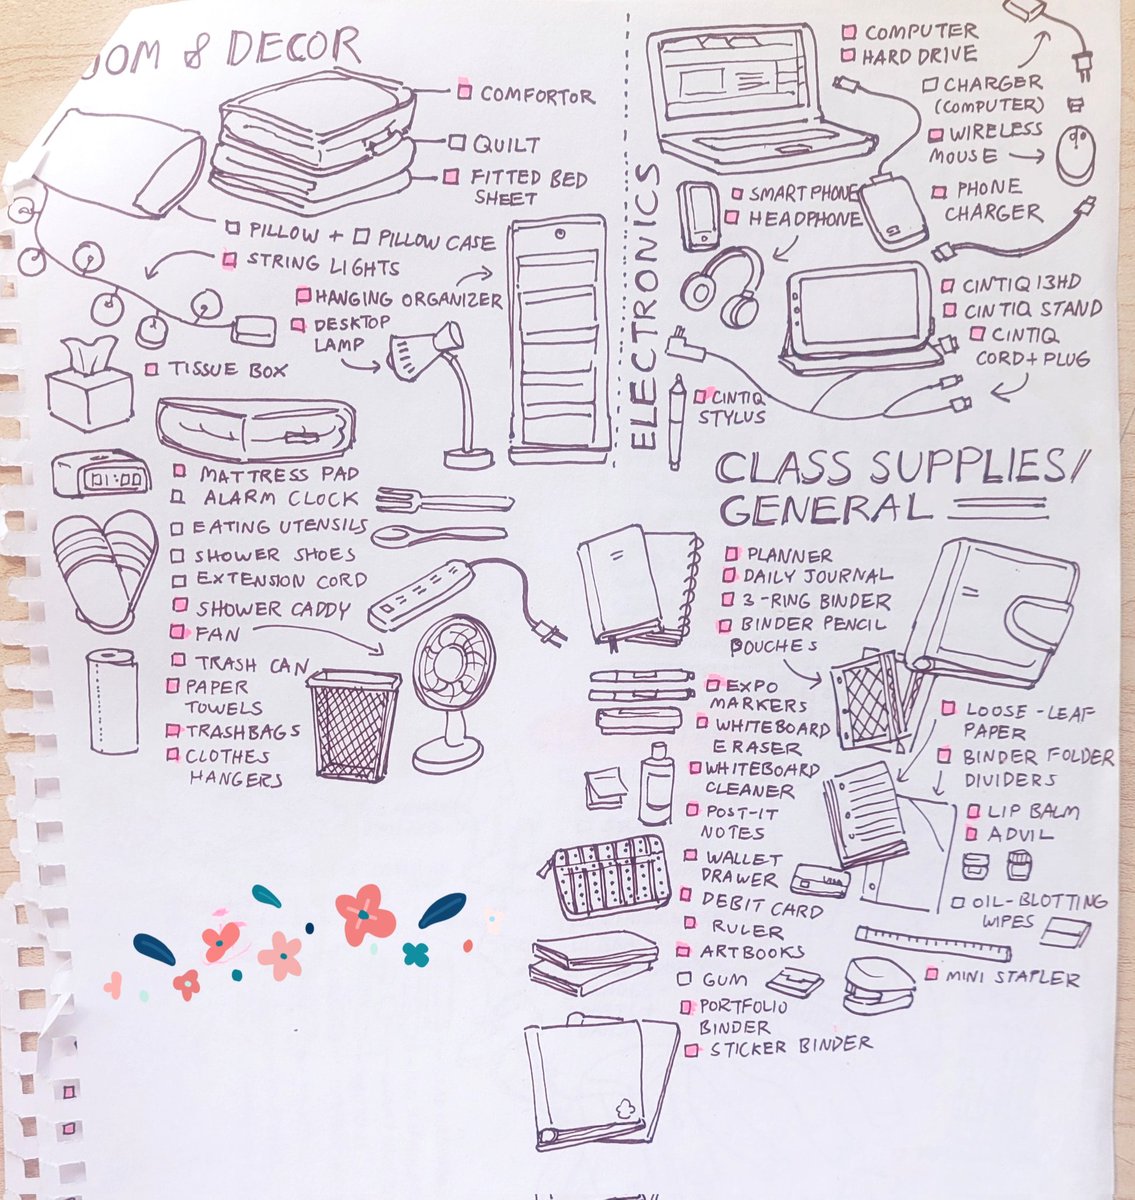 Found my packing checklist for my first year of art school from years ago. The school year will start soon. Maybe it will be useful for some of you